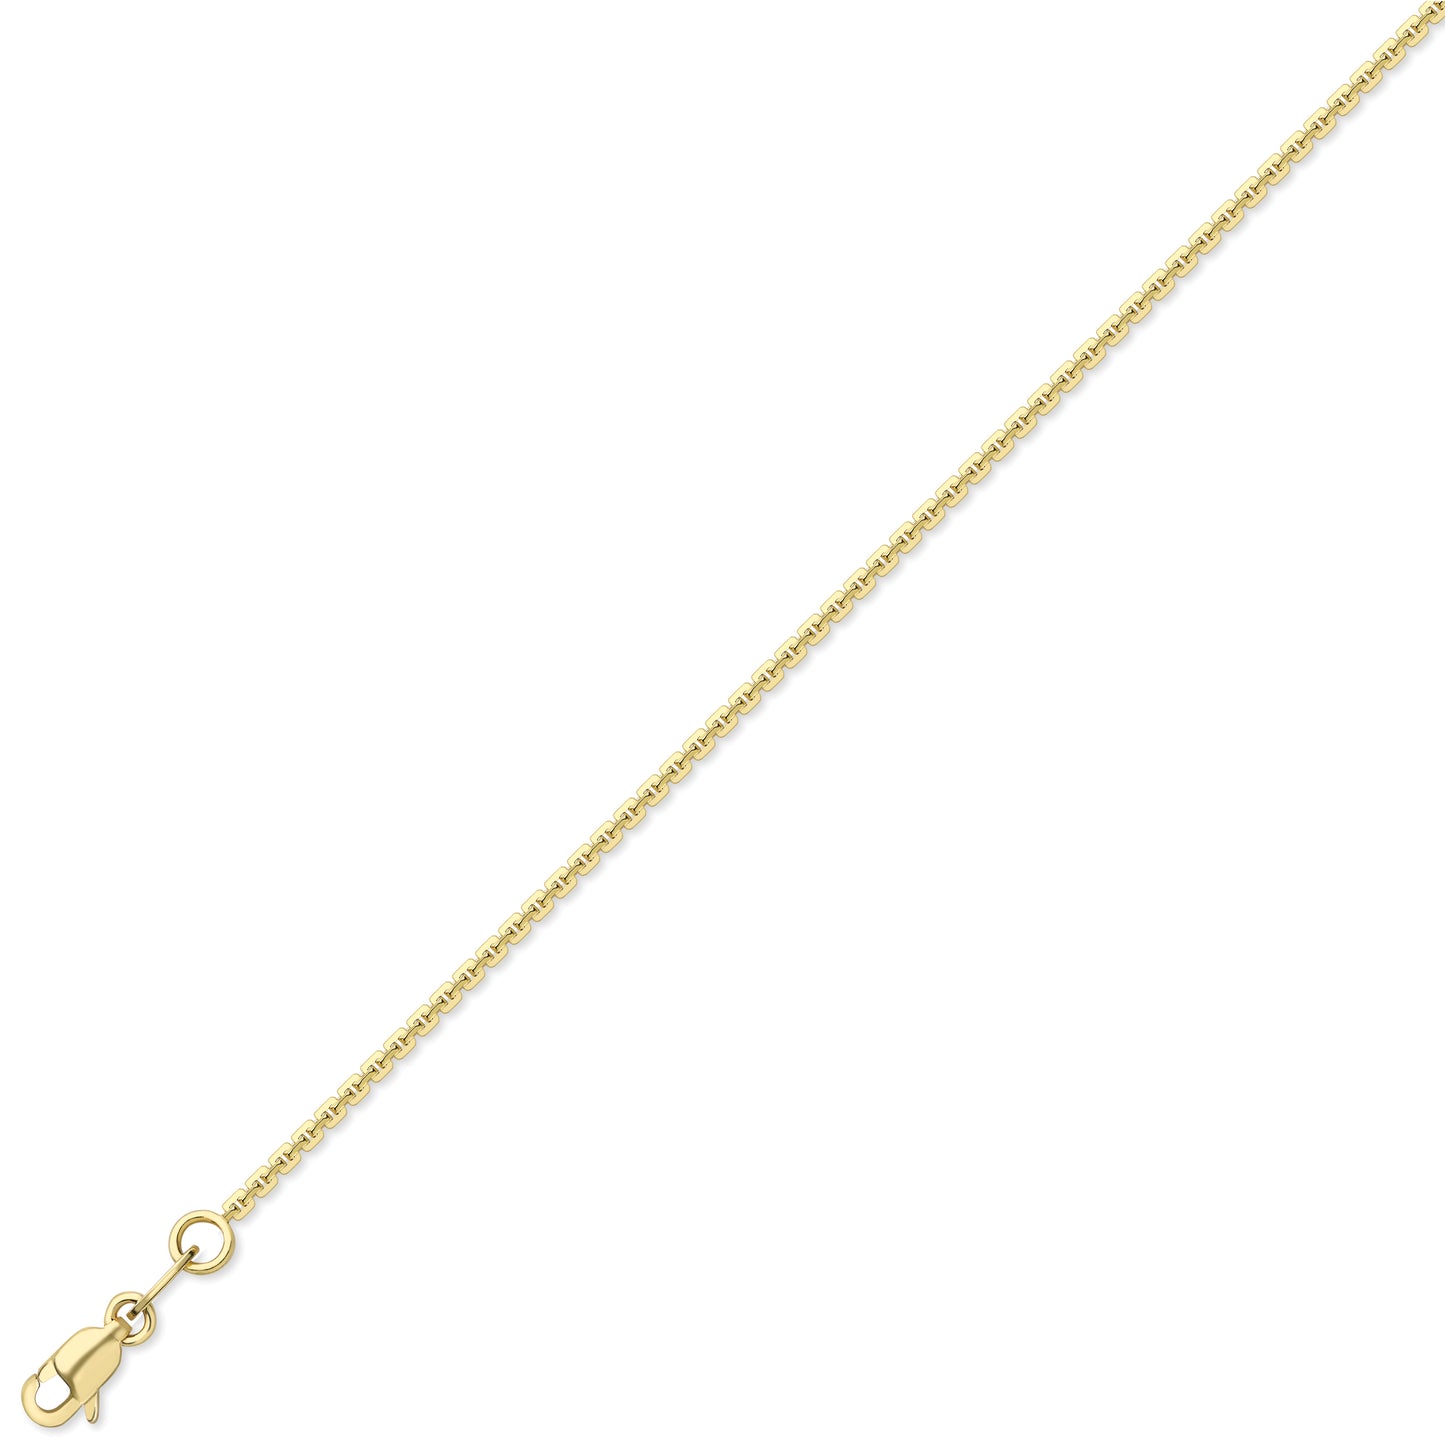 18ct Gold  Square Link Trace Pendant Chain Necklace 1.2mm - CBNR02754